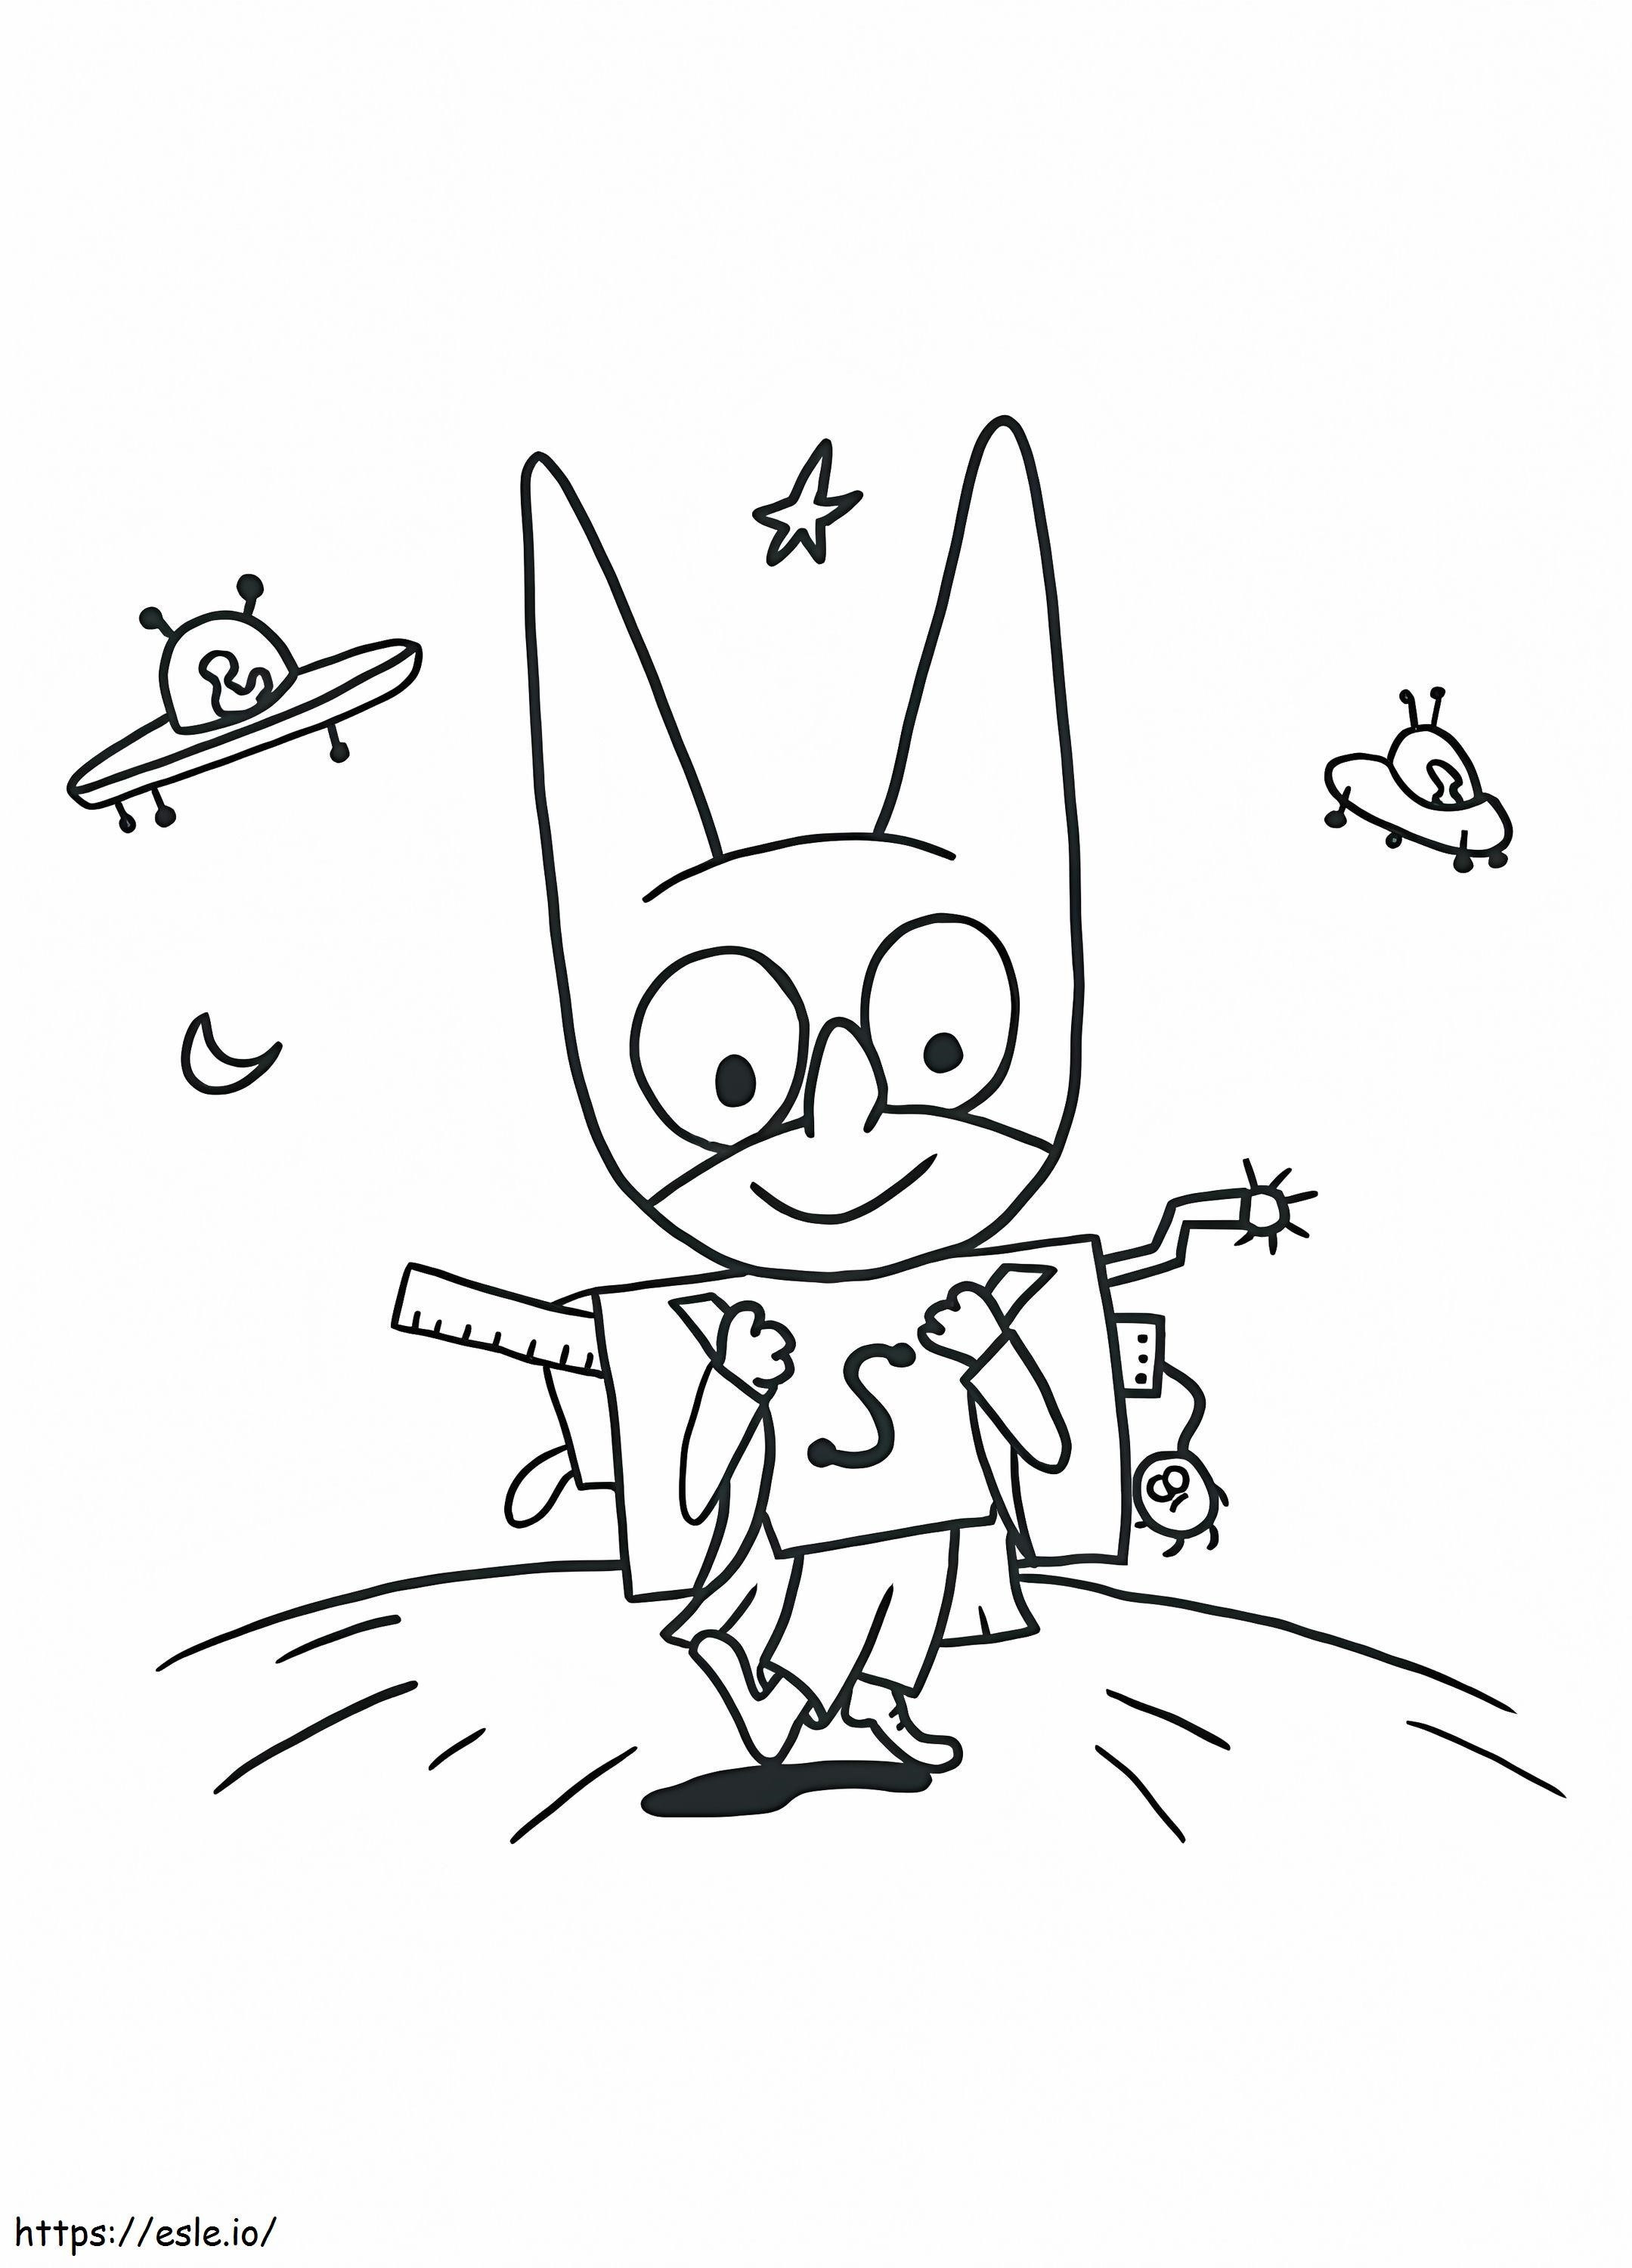 Sam Sam With Backpack coloring page